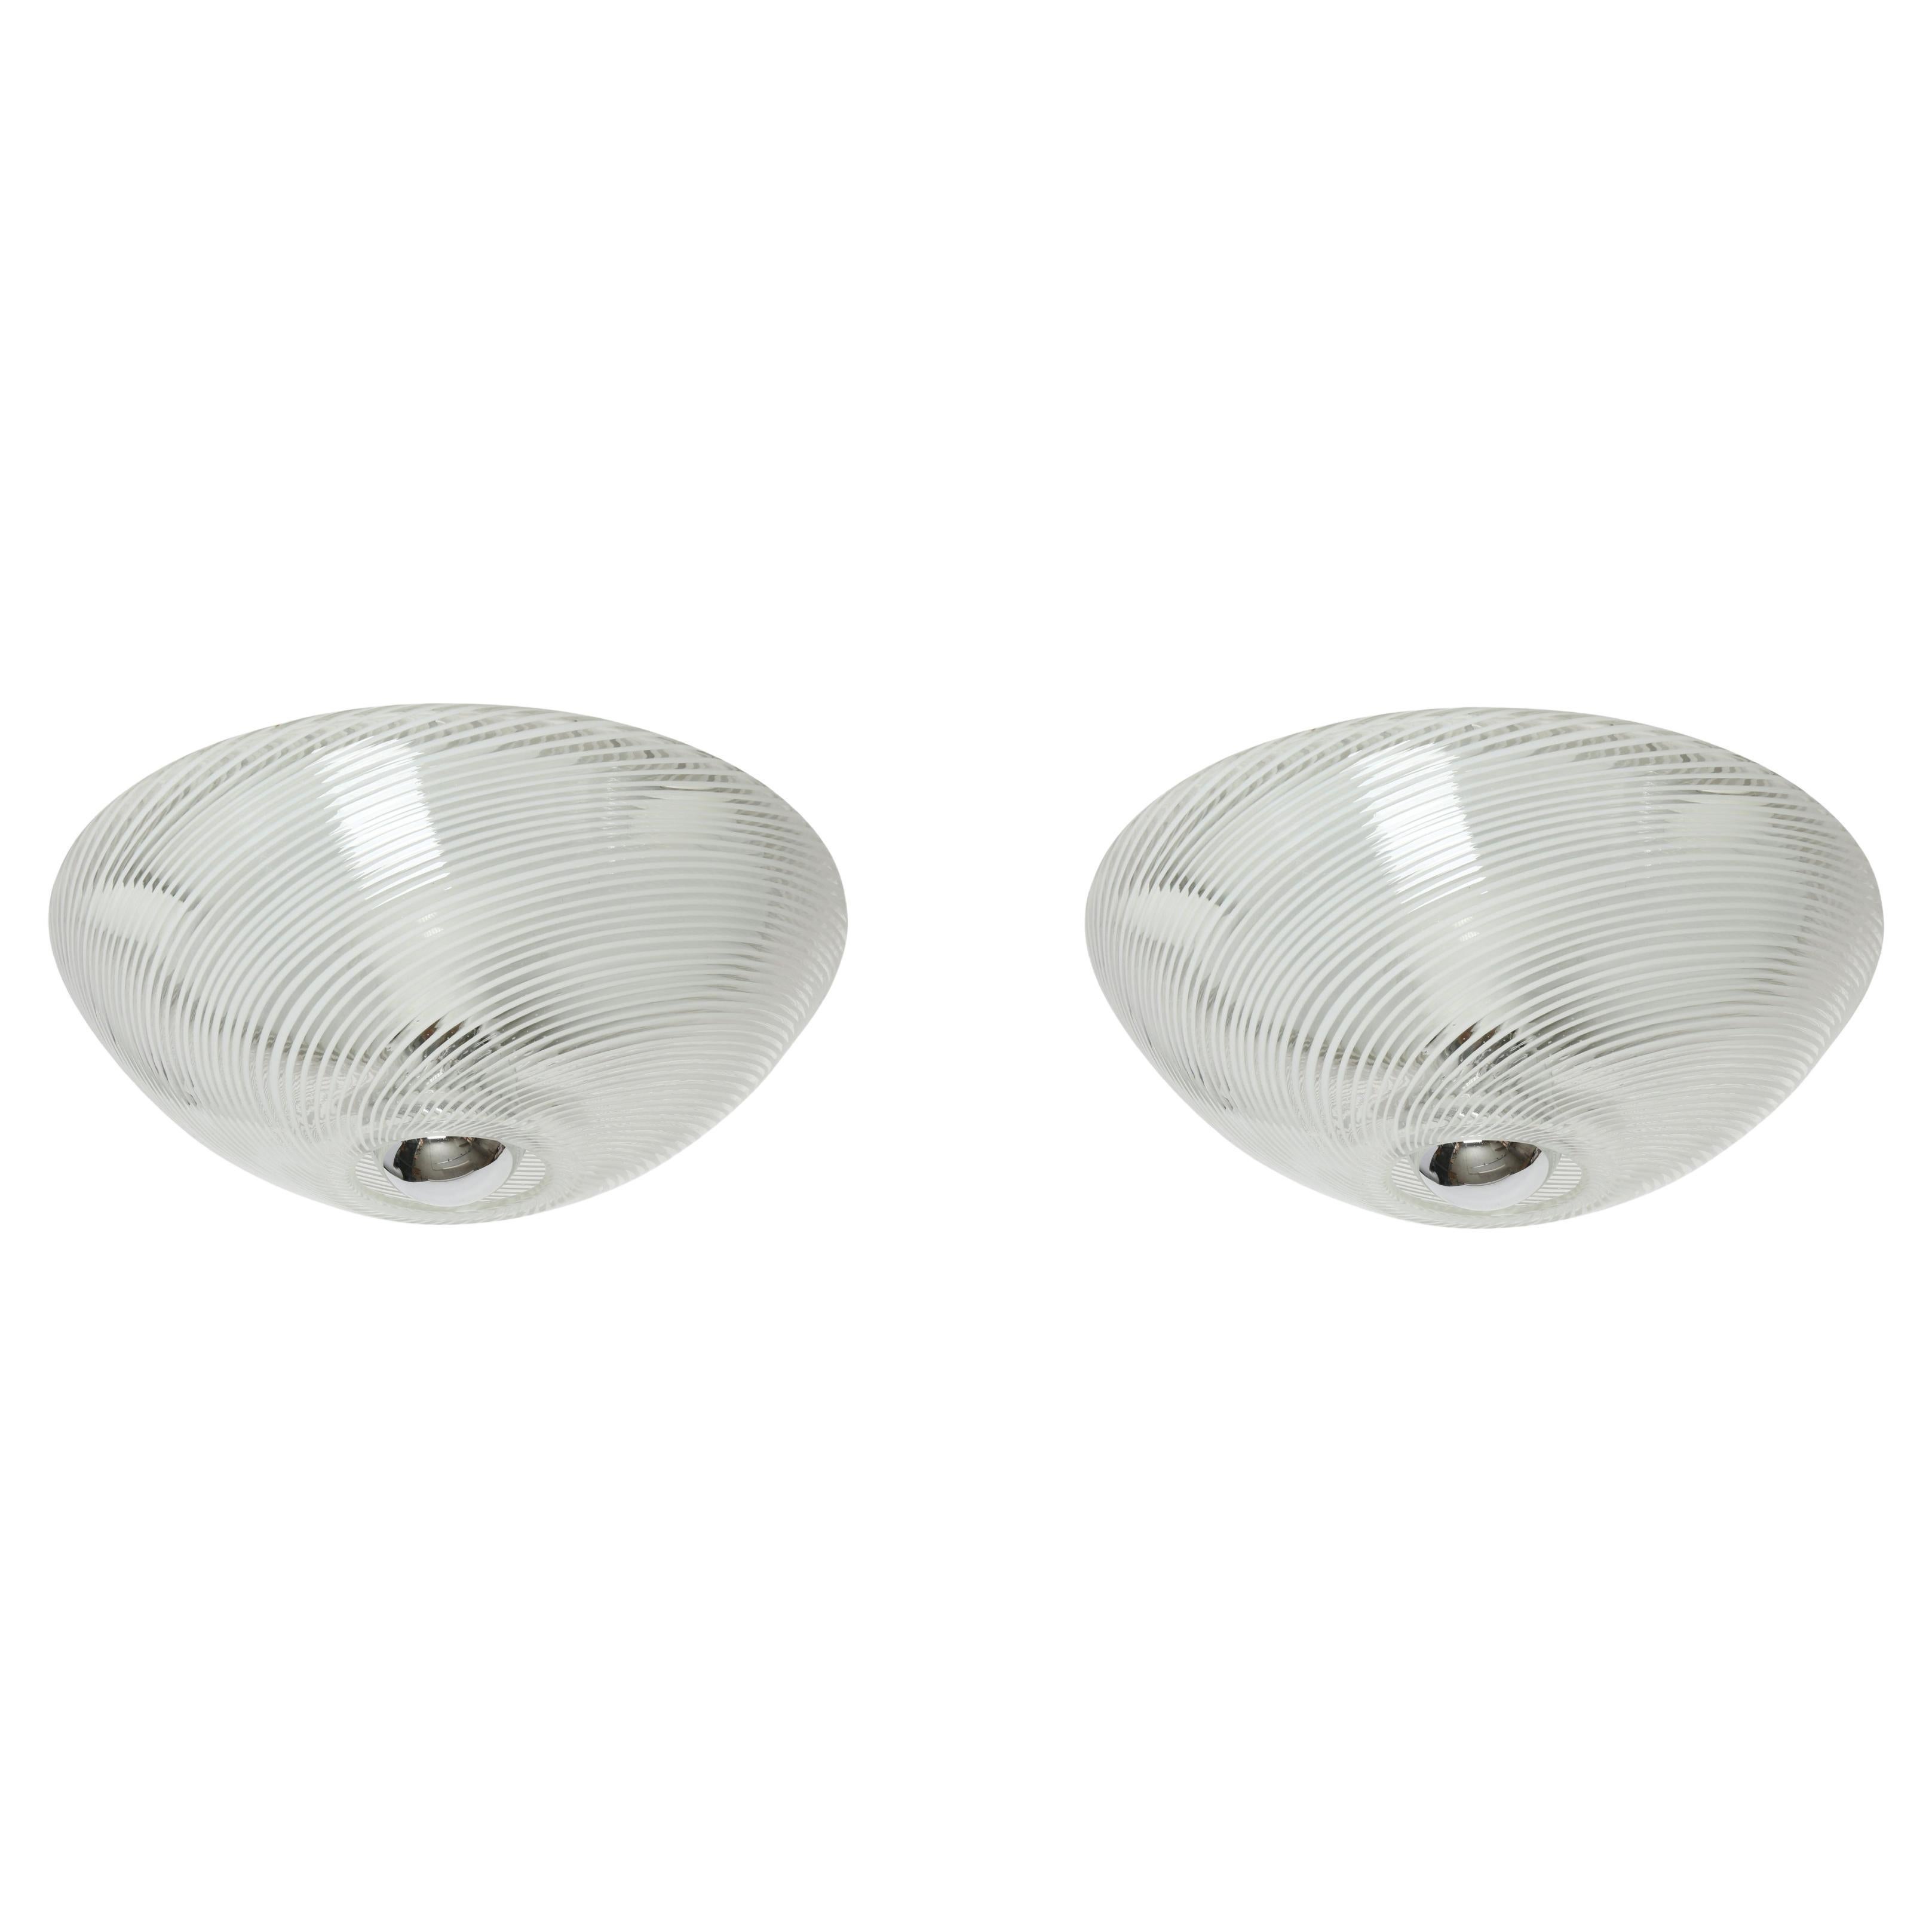 Murano Glass Flush Mount Ceiling or Wall Lights, set of 2